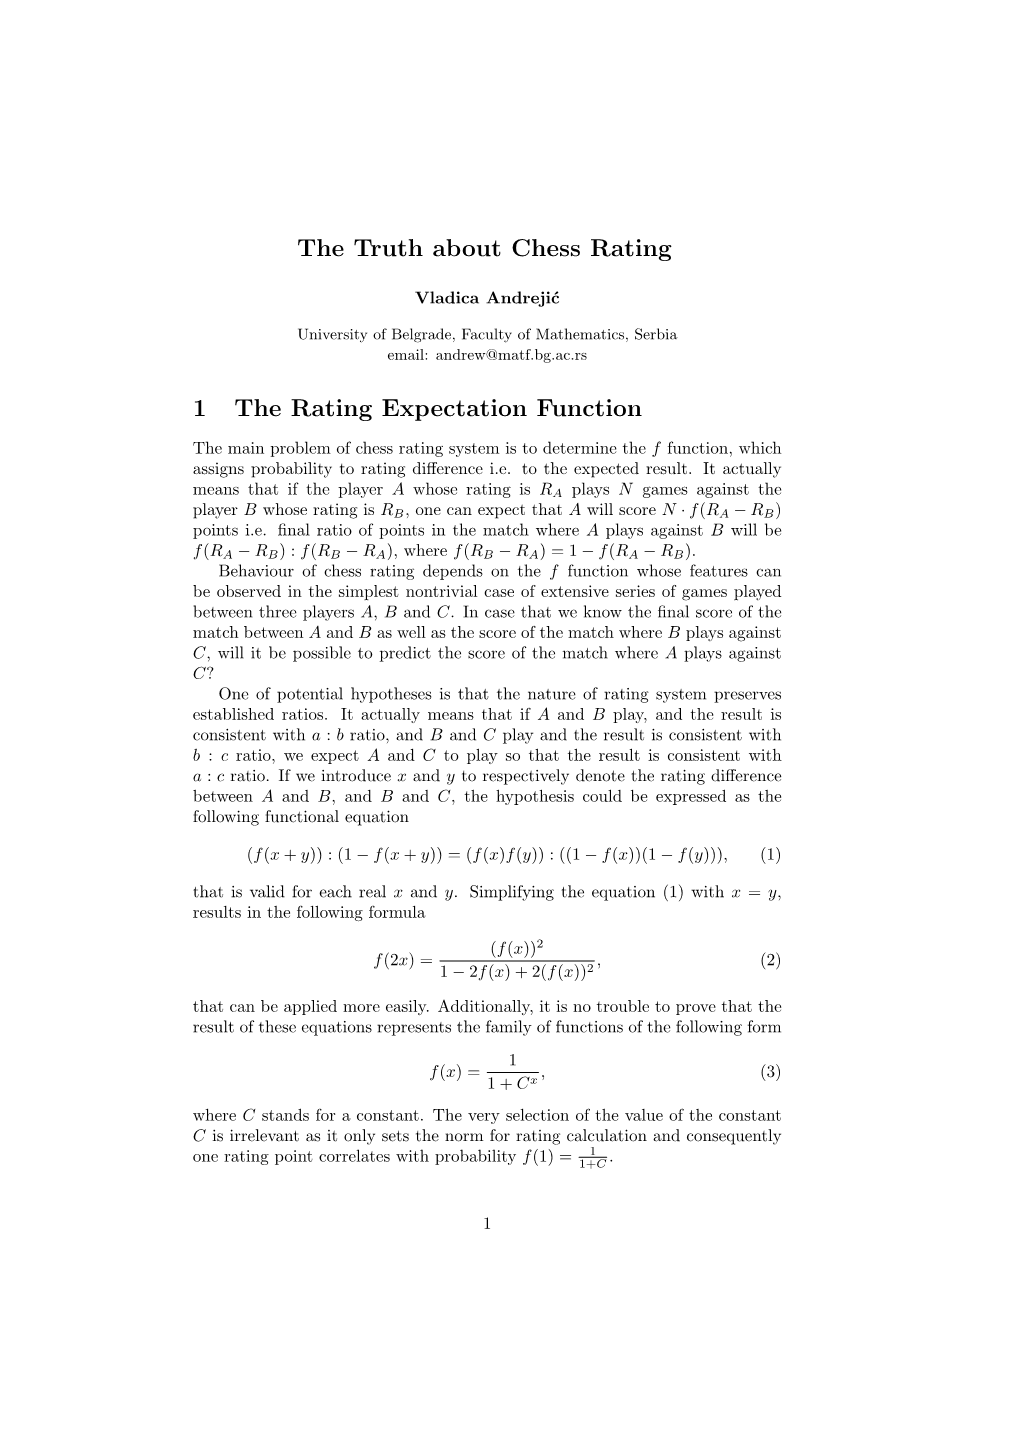 The Truth About Chess Rating 1 the Rating Expectation Function